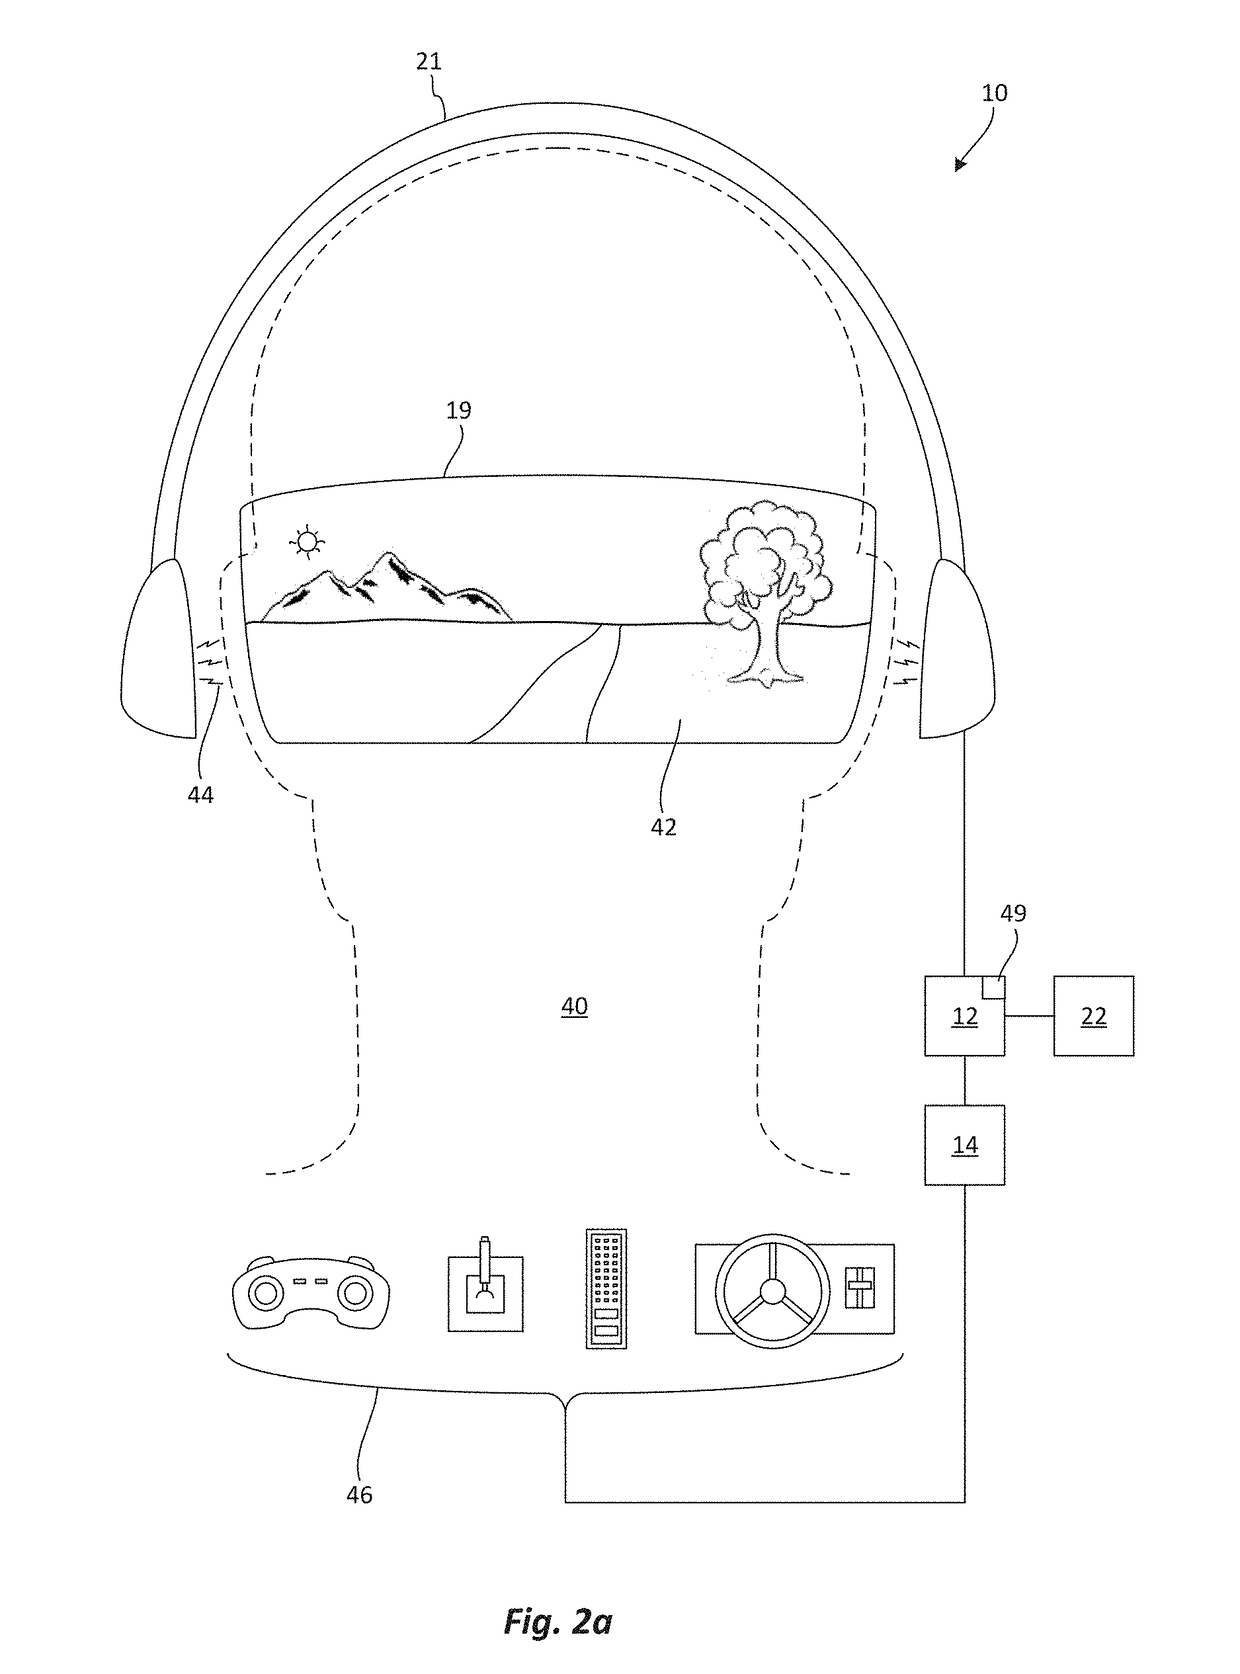 Notification system for virtual reality devices